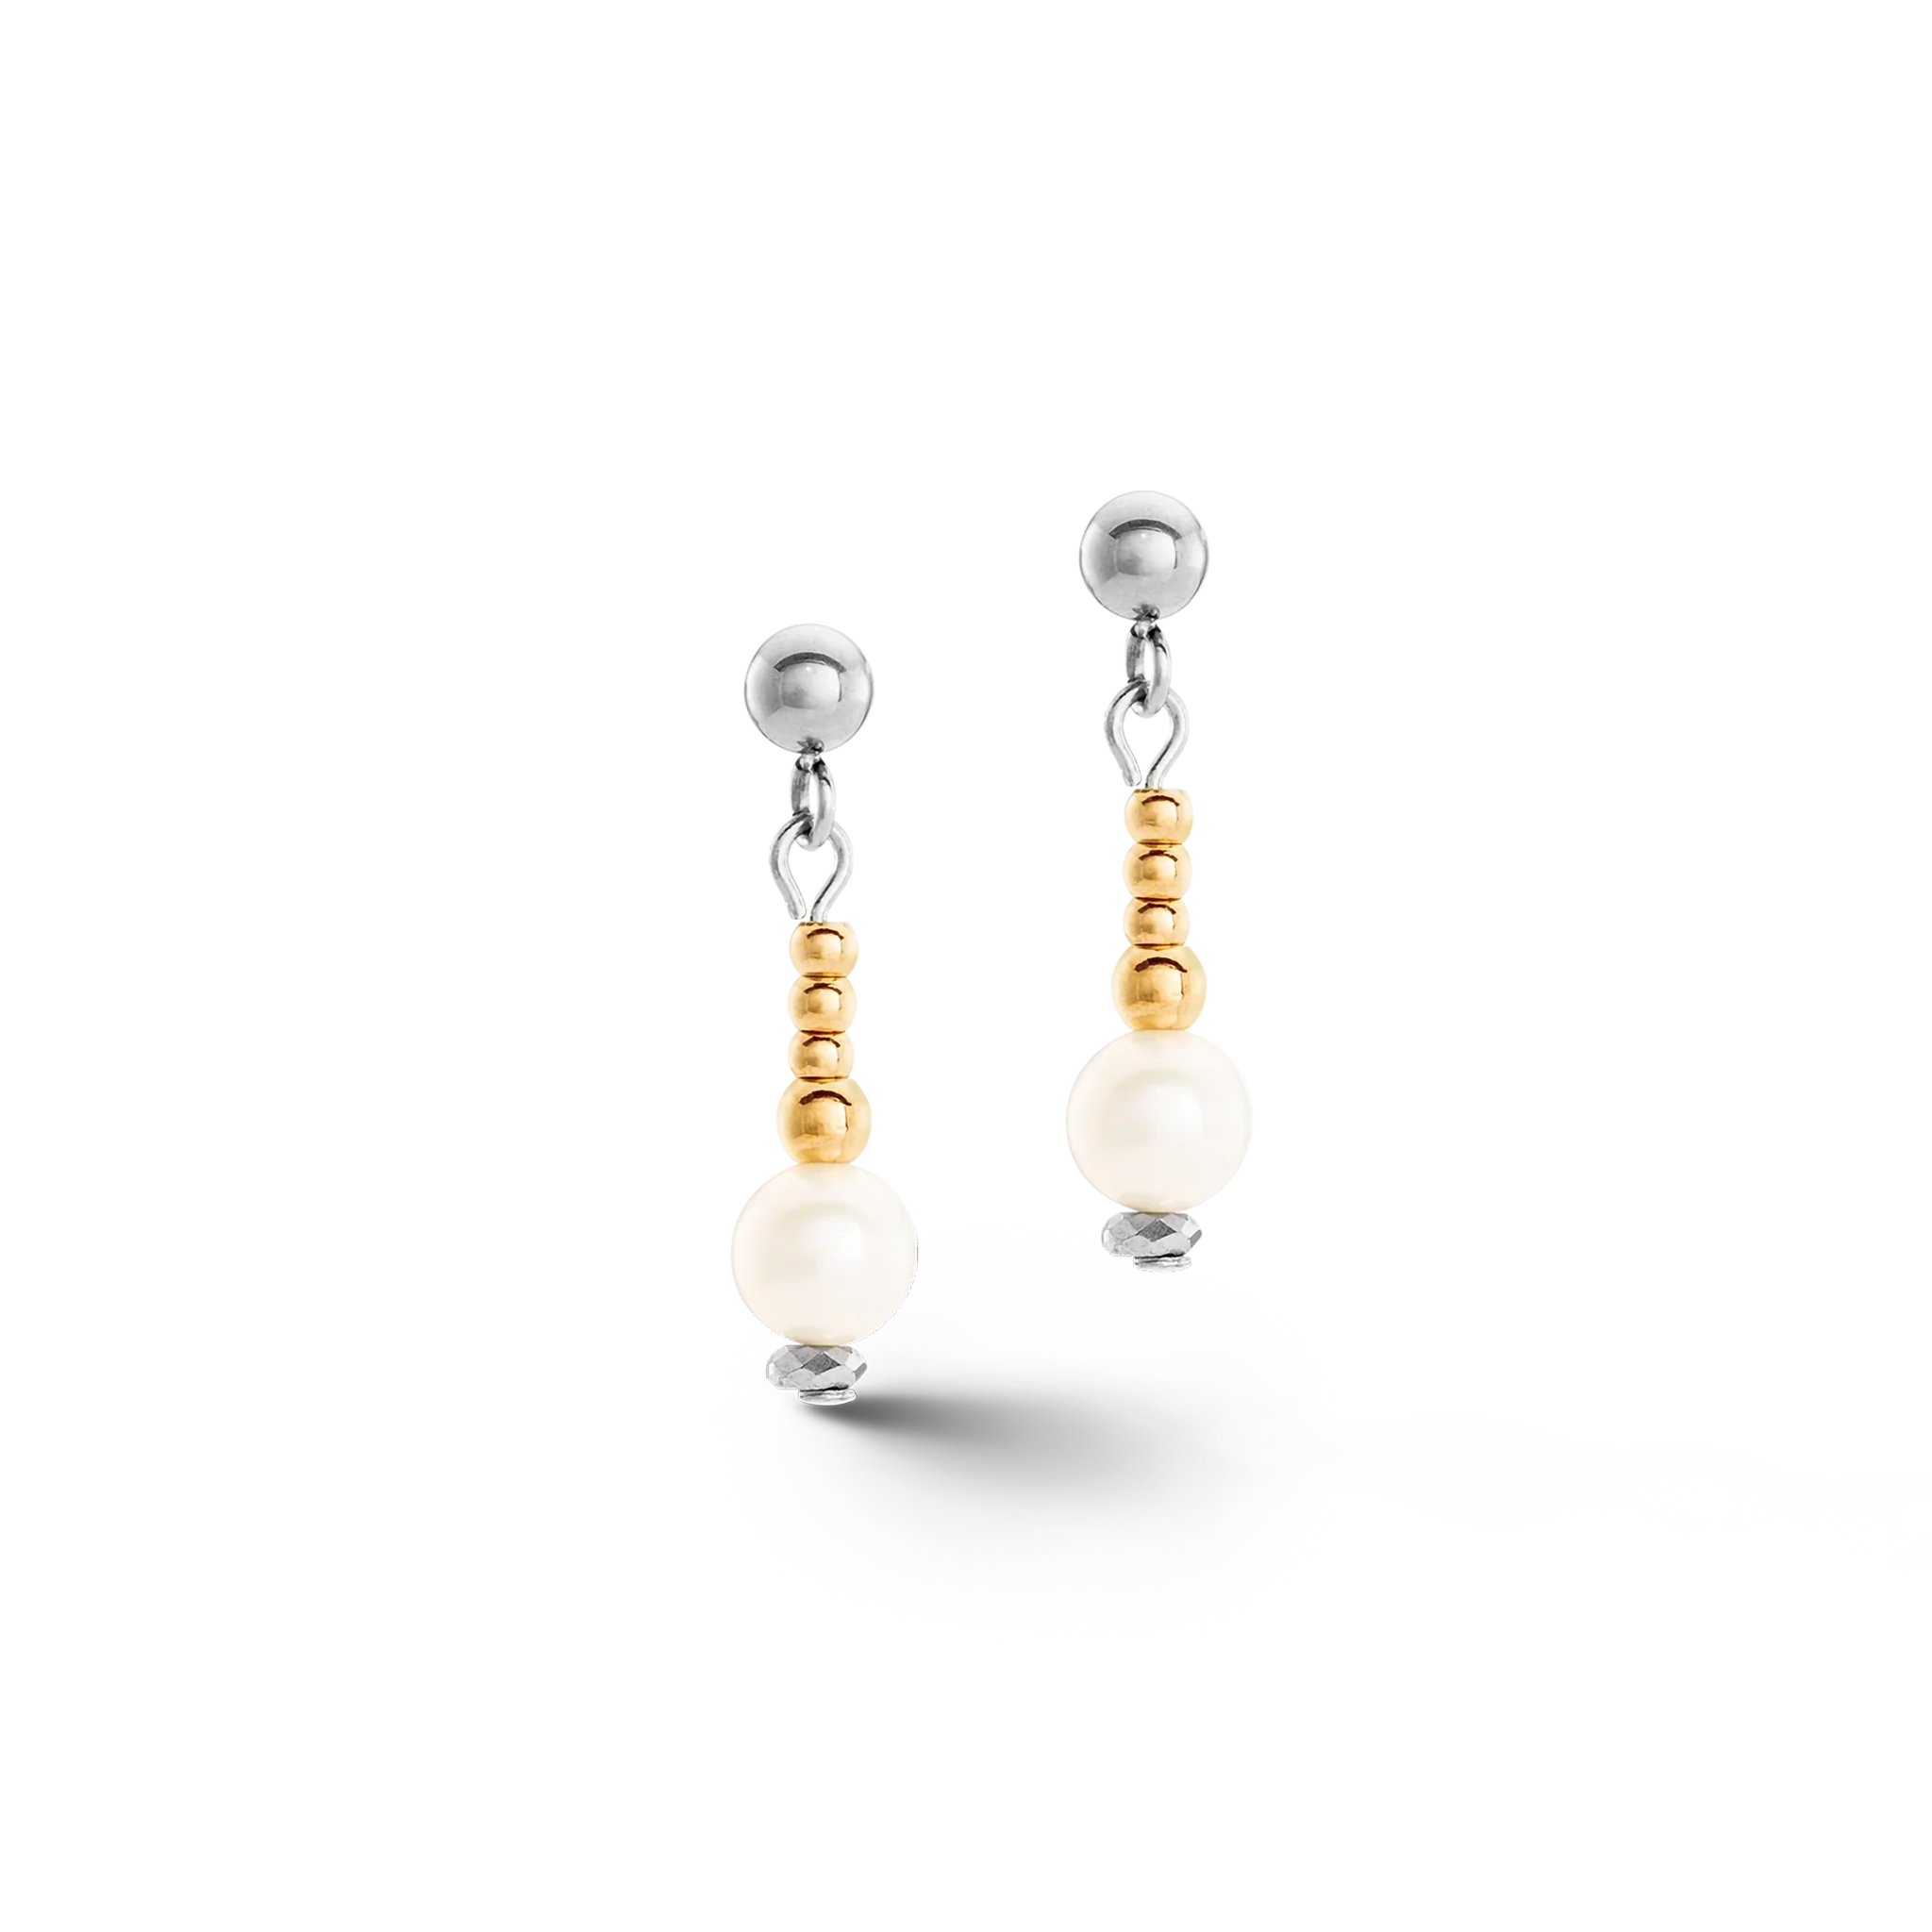 A pair of silver and gold beaded earrings with round freshwater pearls at the ends